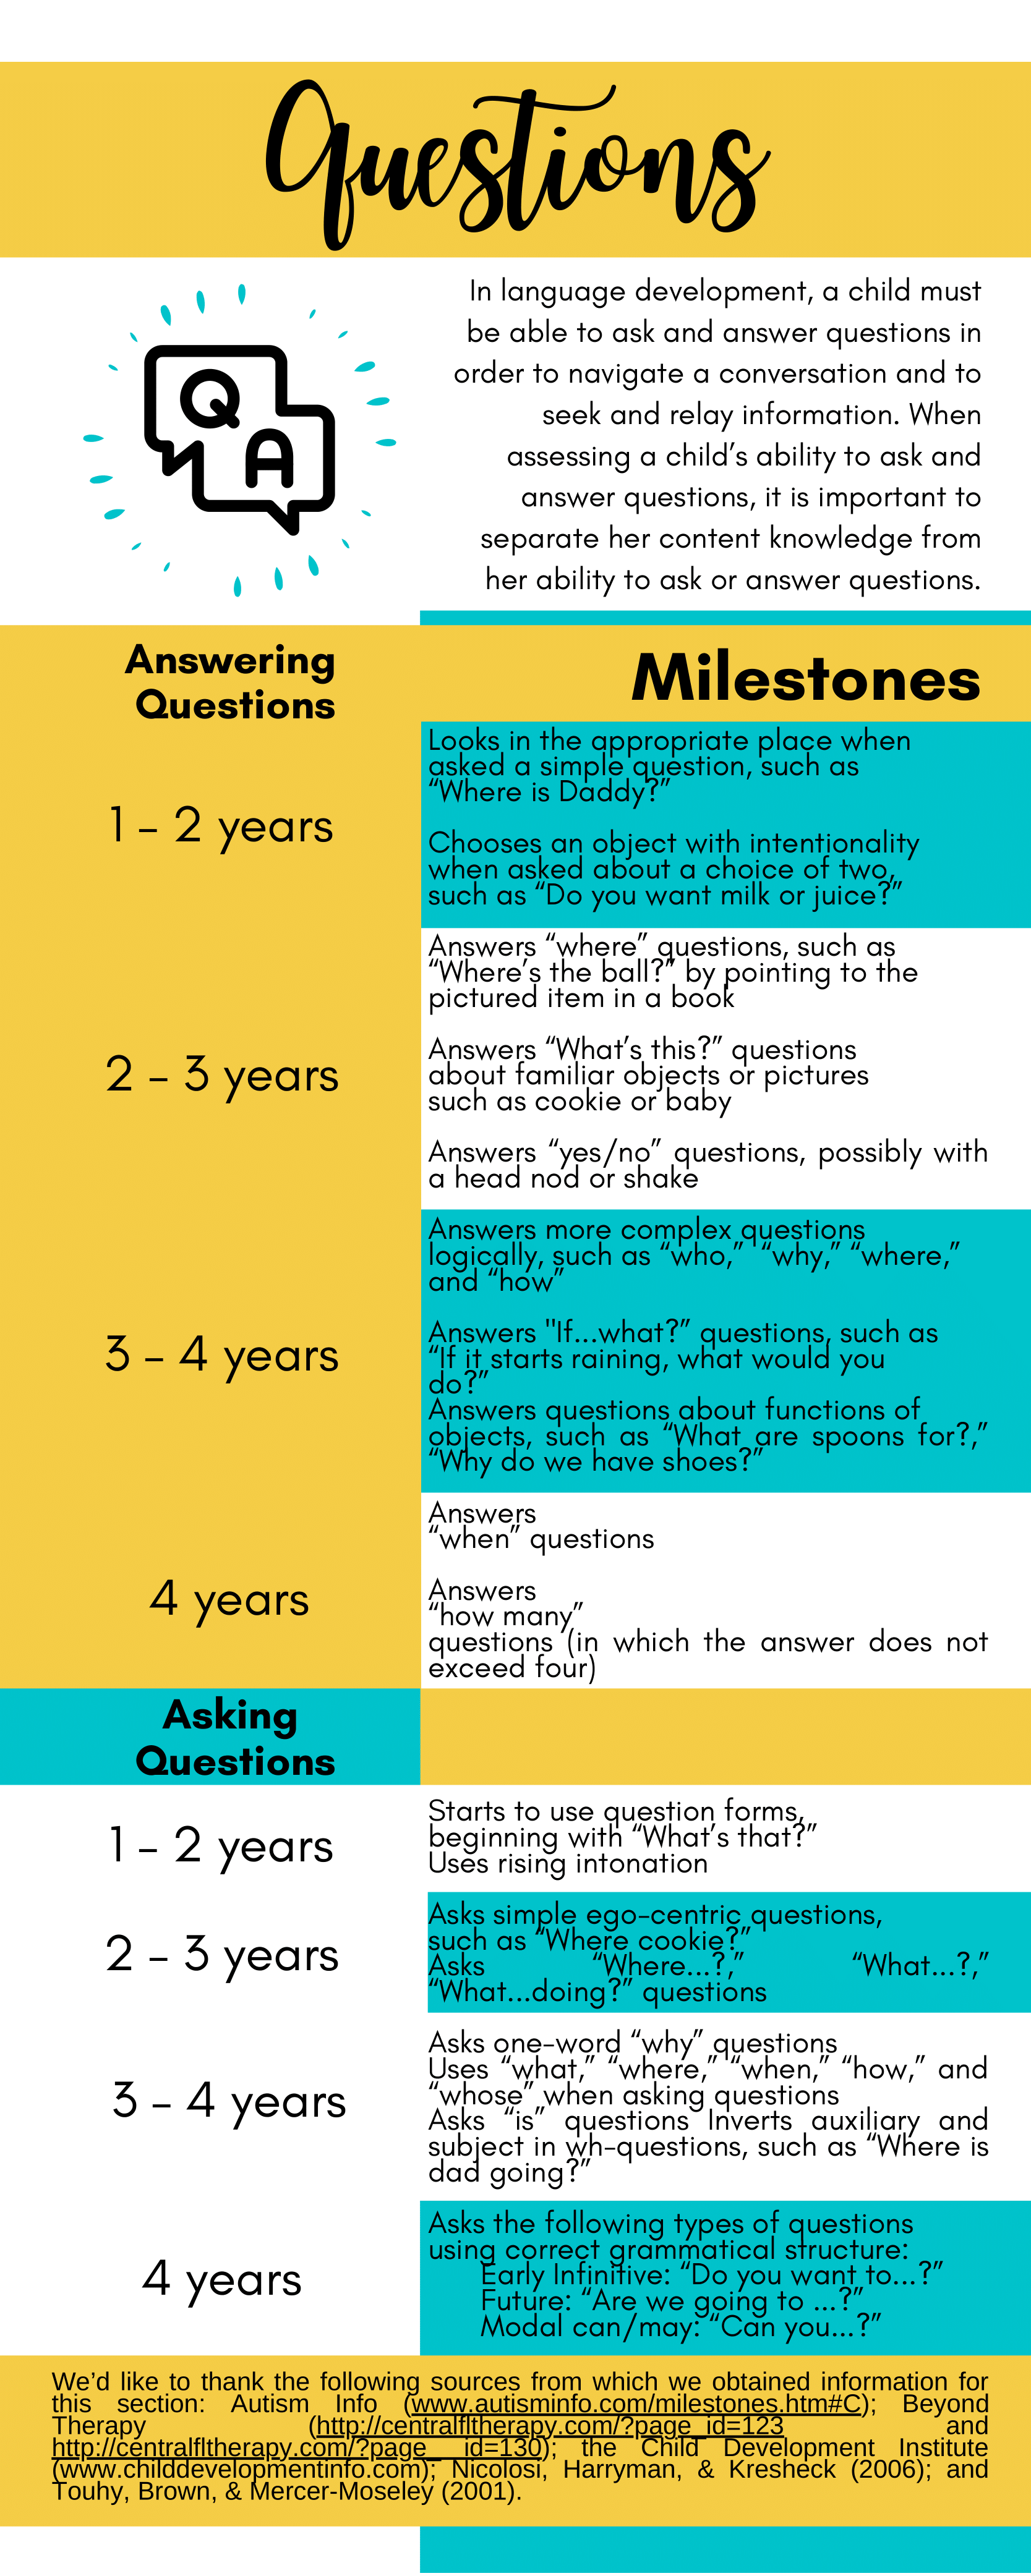 Question Answering and Asking Milestones